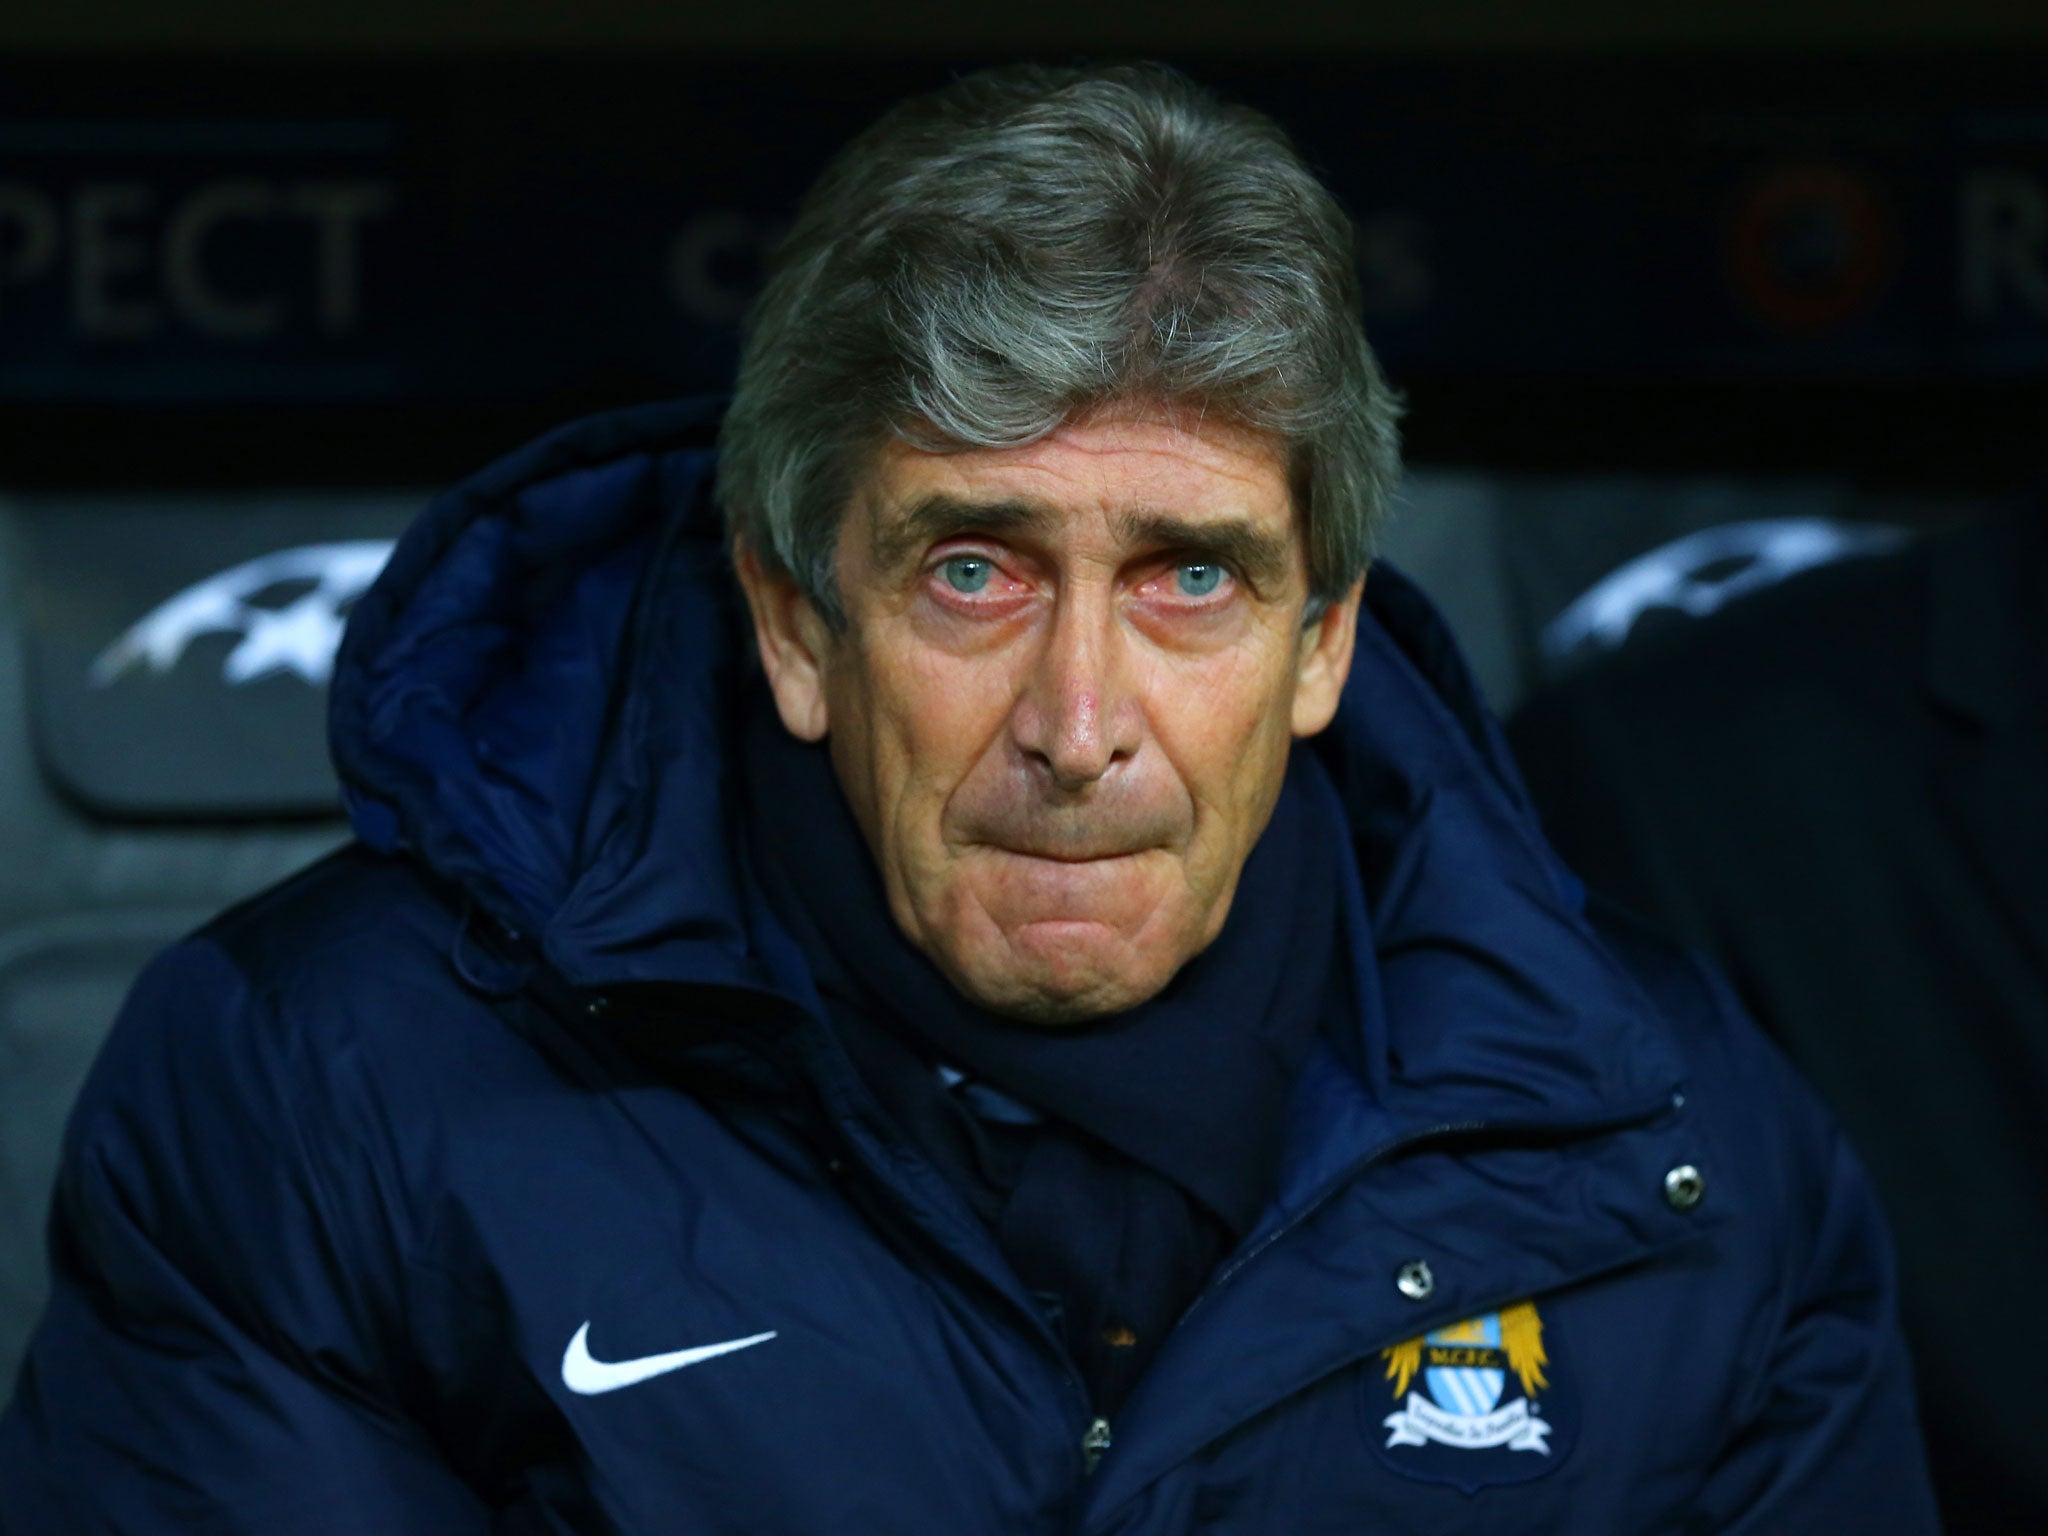 Manchester City manager Manuel Pellegrini thought they needed to beat Bayern Munich 5-2 rather than 4-2 to overtake them in Group A